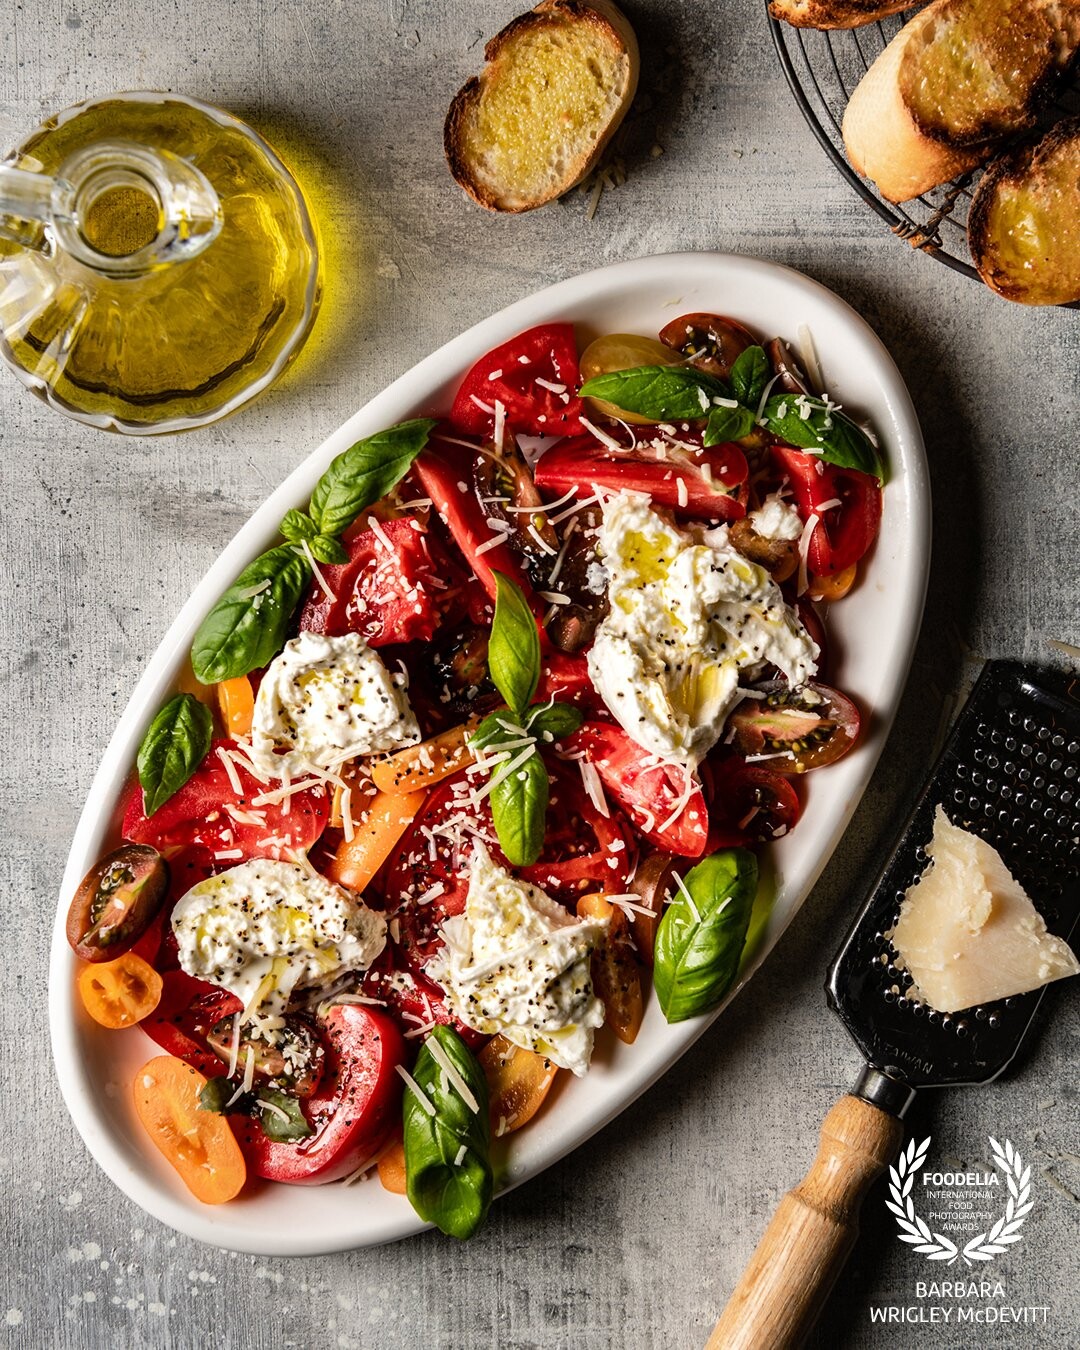 Nothing better than a ripe tomato salad with plenty of fresh basil, burrata and Parmigiano-Reggiano cheese.  Crusty bread to sop up the olive oil goodness completes this healthy dish.<br />
<br />
Shot with Nikon D850 on a 24-70mm lens and Profoto B10 artificial light with rectangular softbox.  Light positioned at the 11:00 position - my favorite.